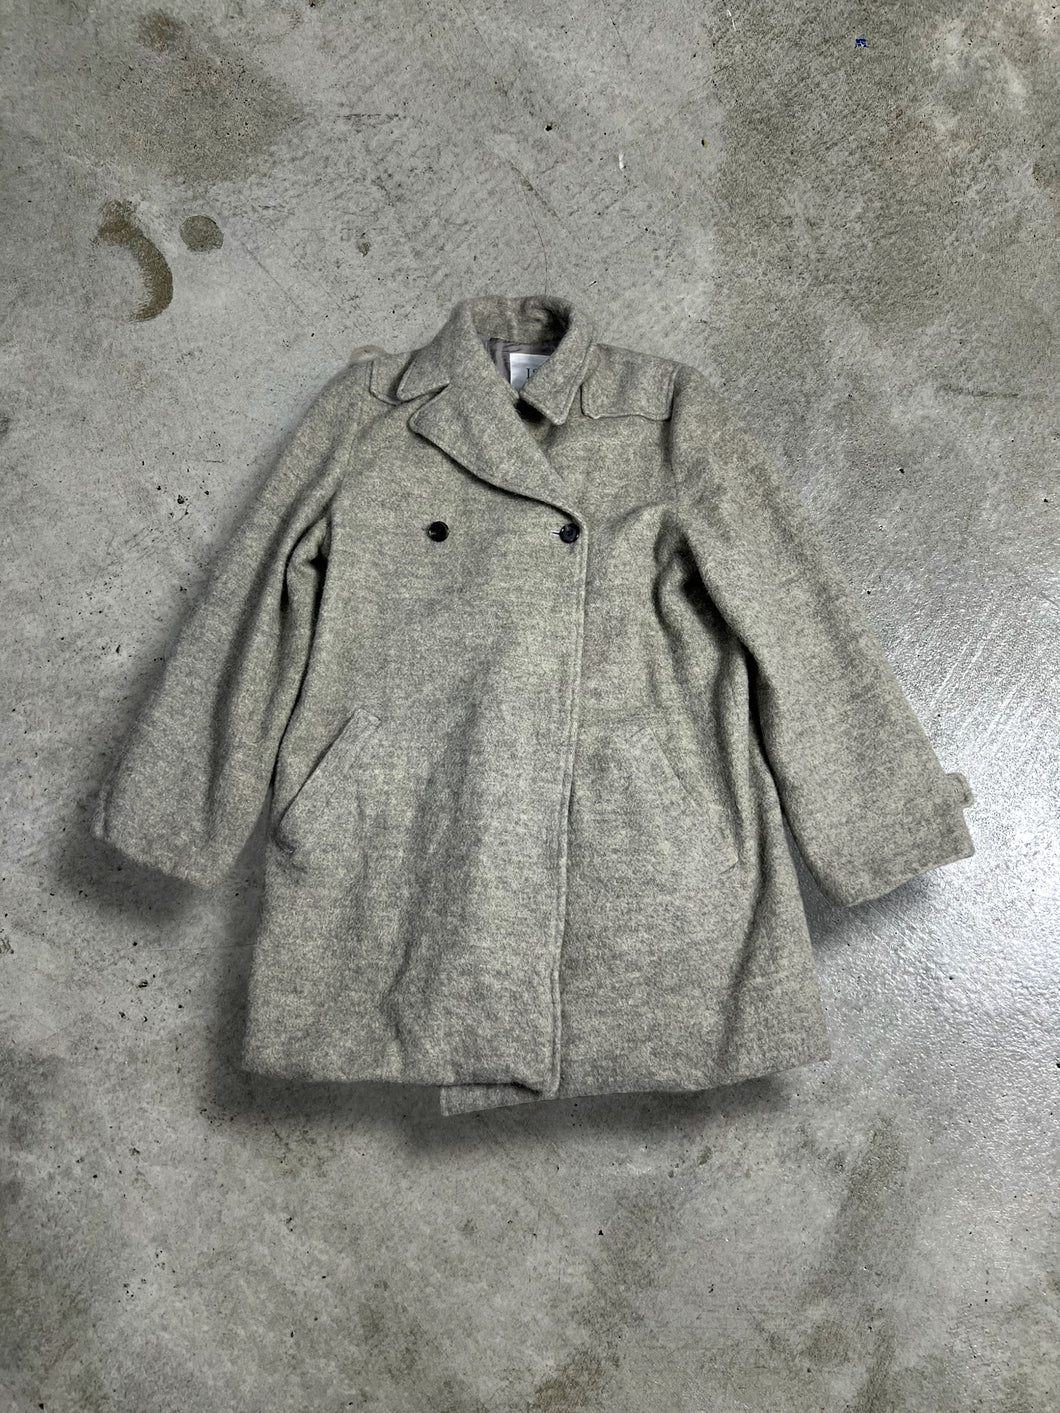 I.S. by Sunao Kuwahara Lined Wool Coat (M) GTMPT475